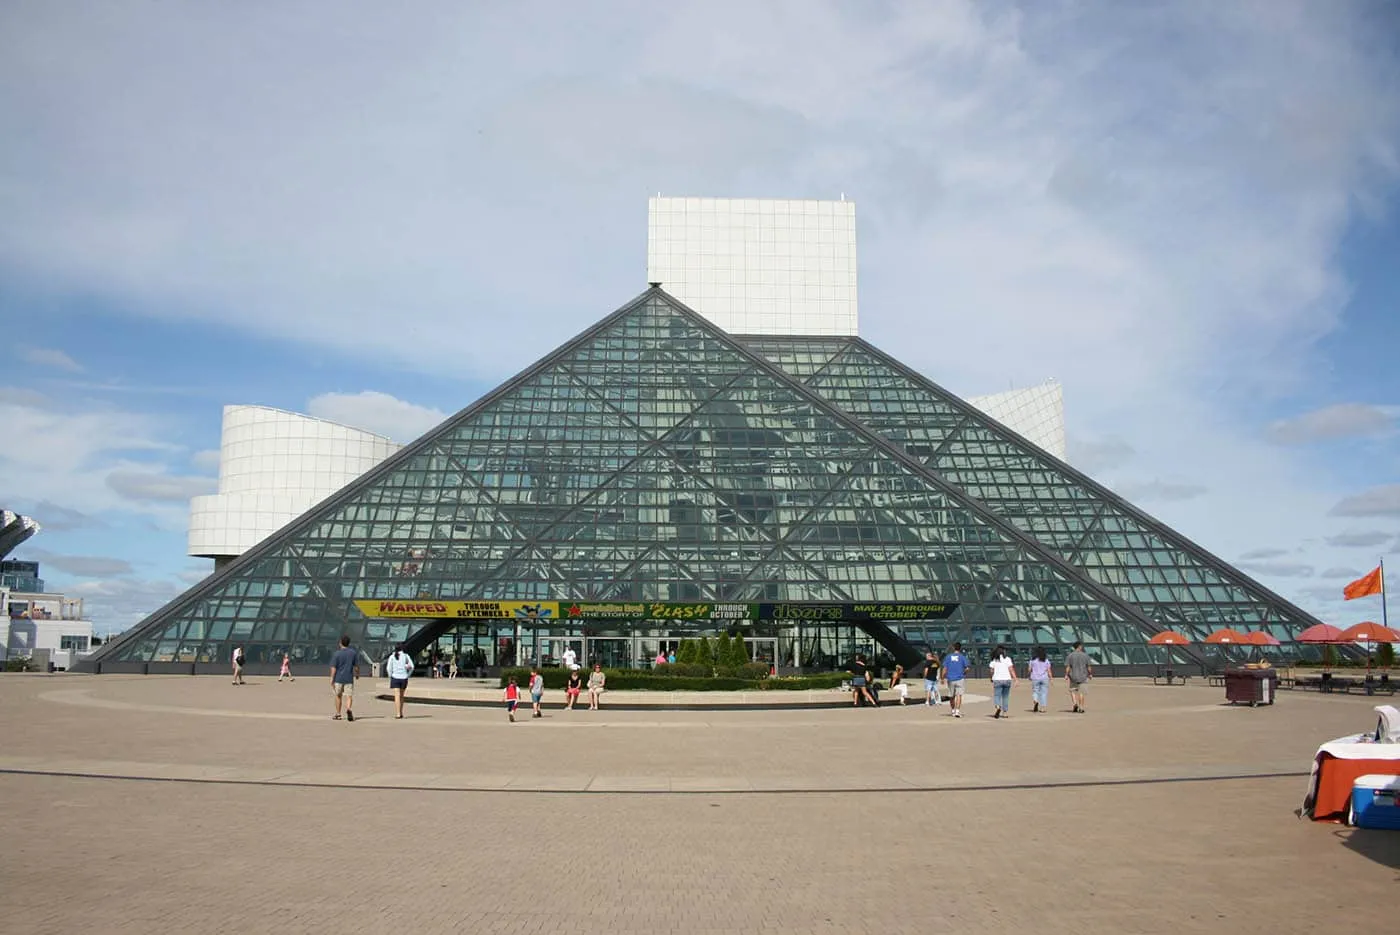 Rock and Roll Hall of Fame in Cleveland, Ohio